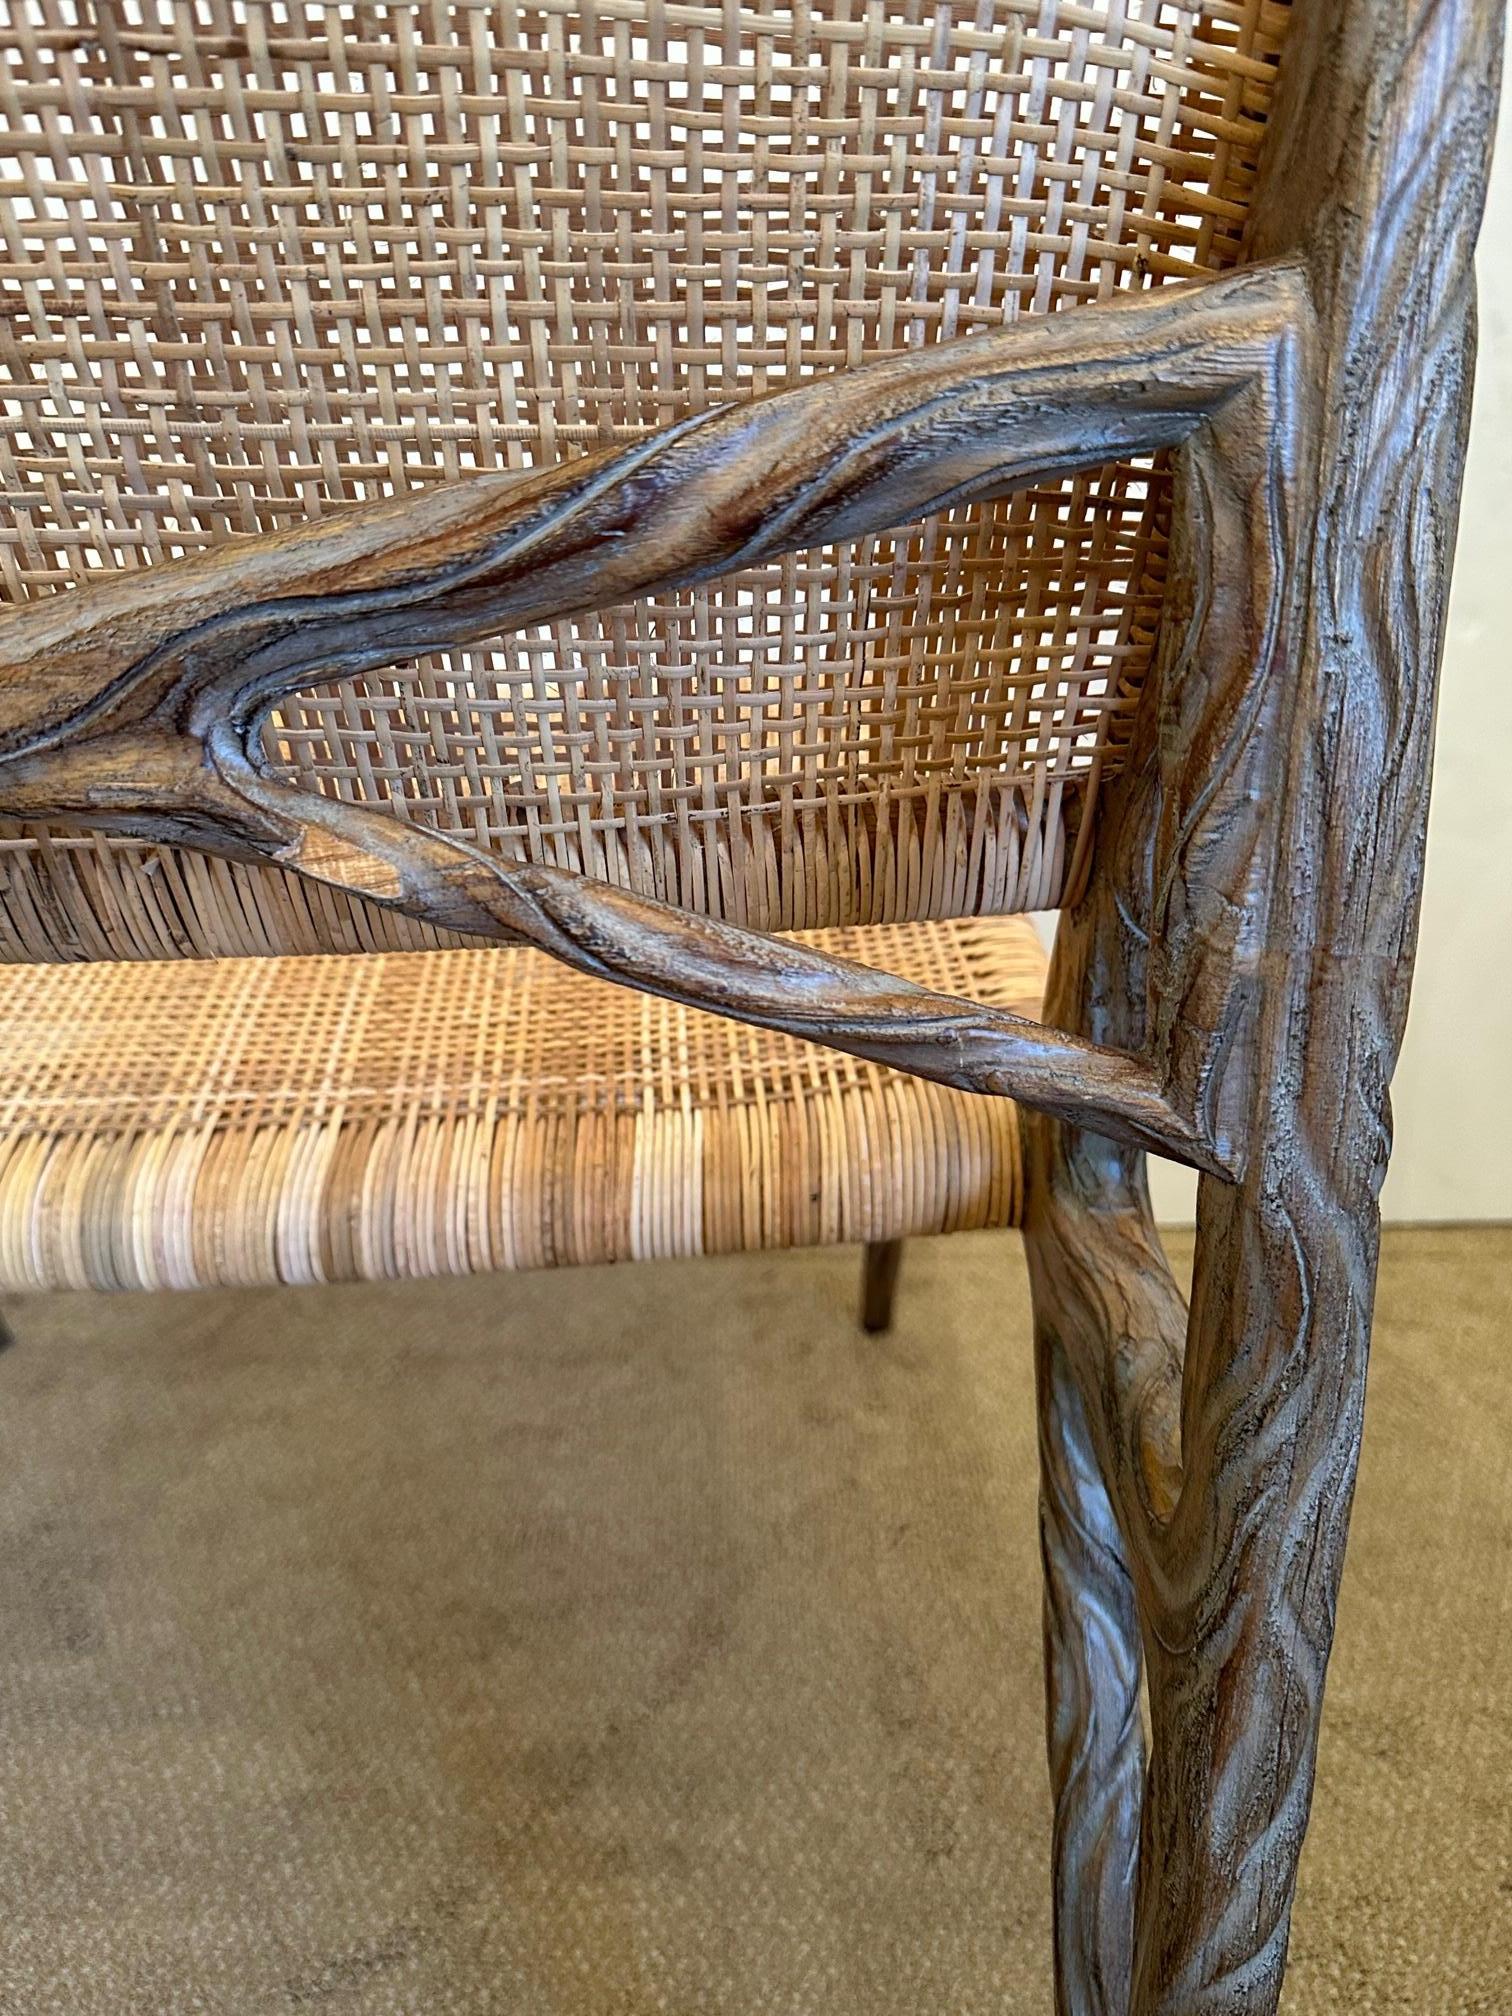 Superb organic modern occasional chair having sculptural faux bois twig like structure and shapely legs with woven natural colored rattan seat and back. This is the favorite chair in a room for it's forward design and natural feel.
Seat height and